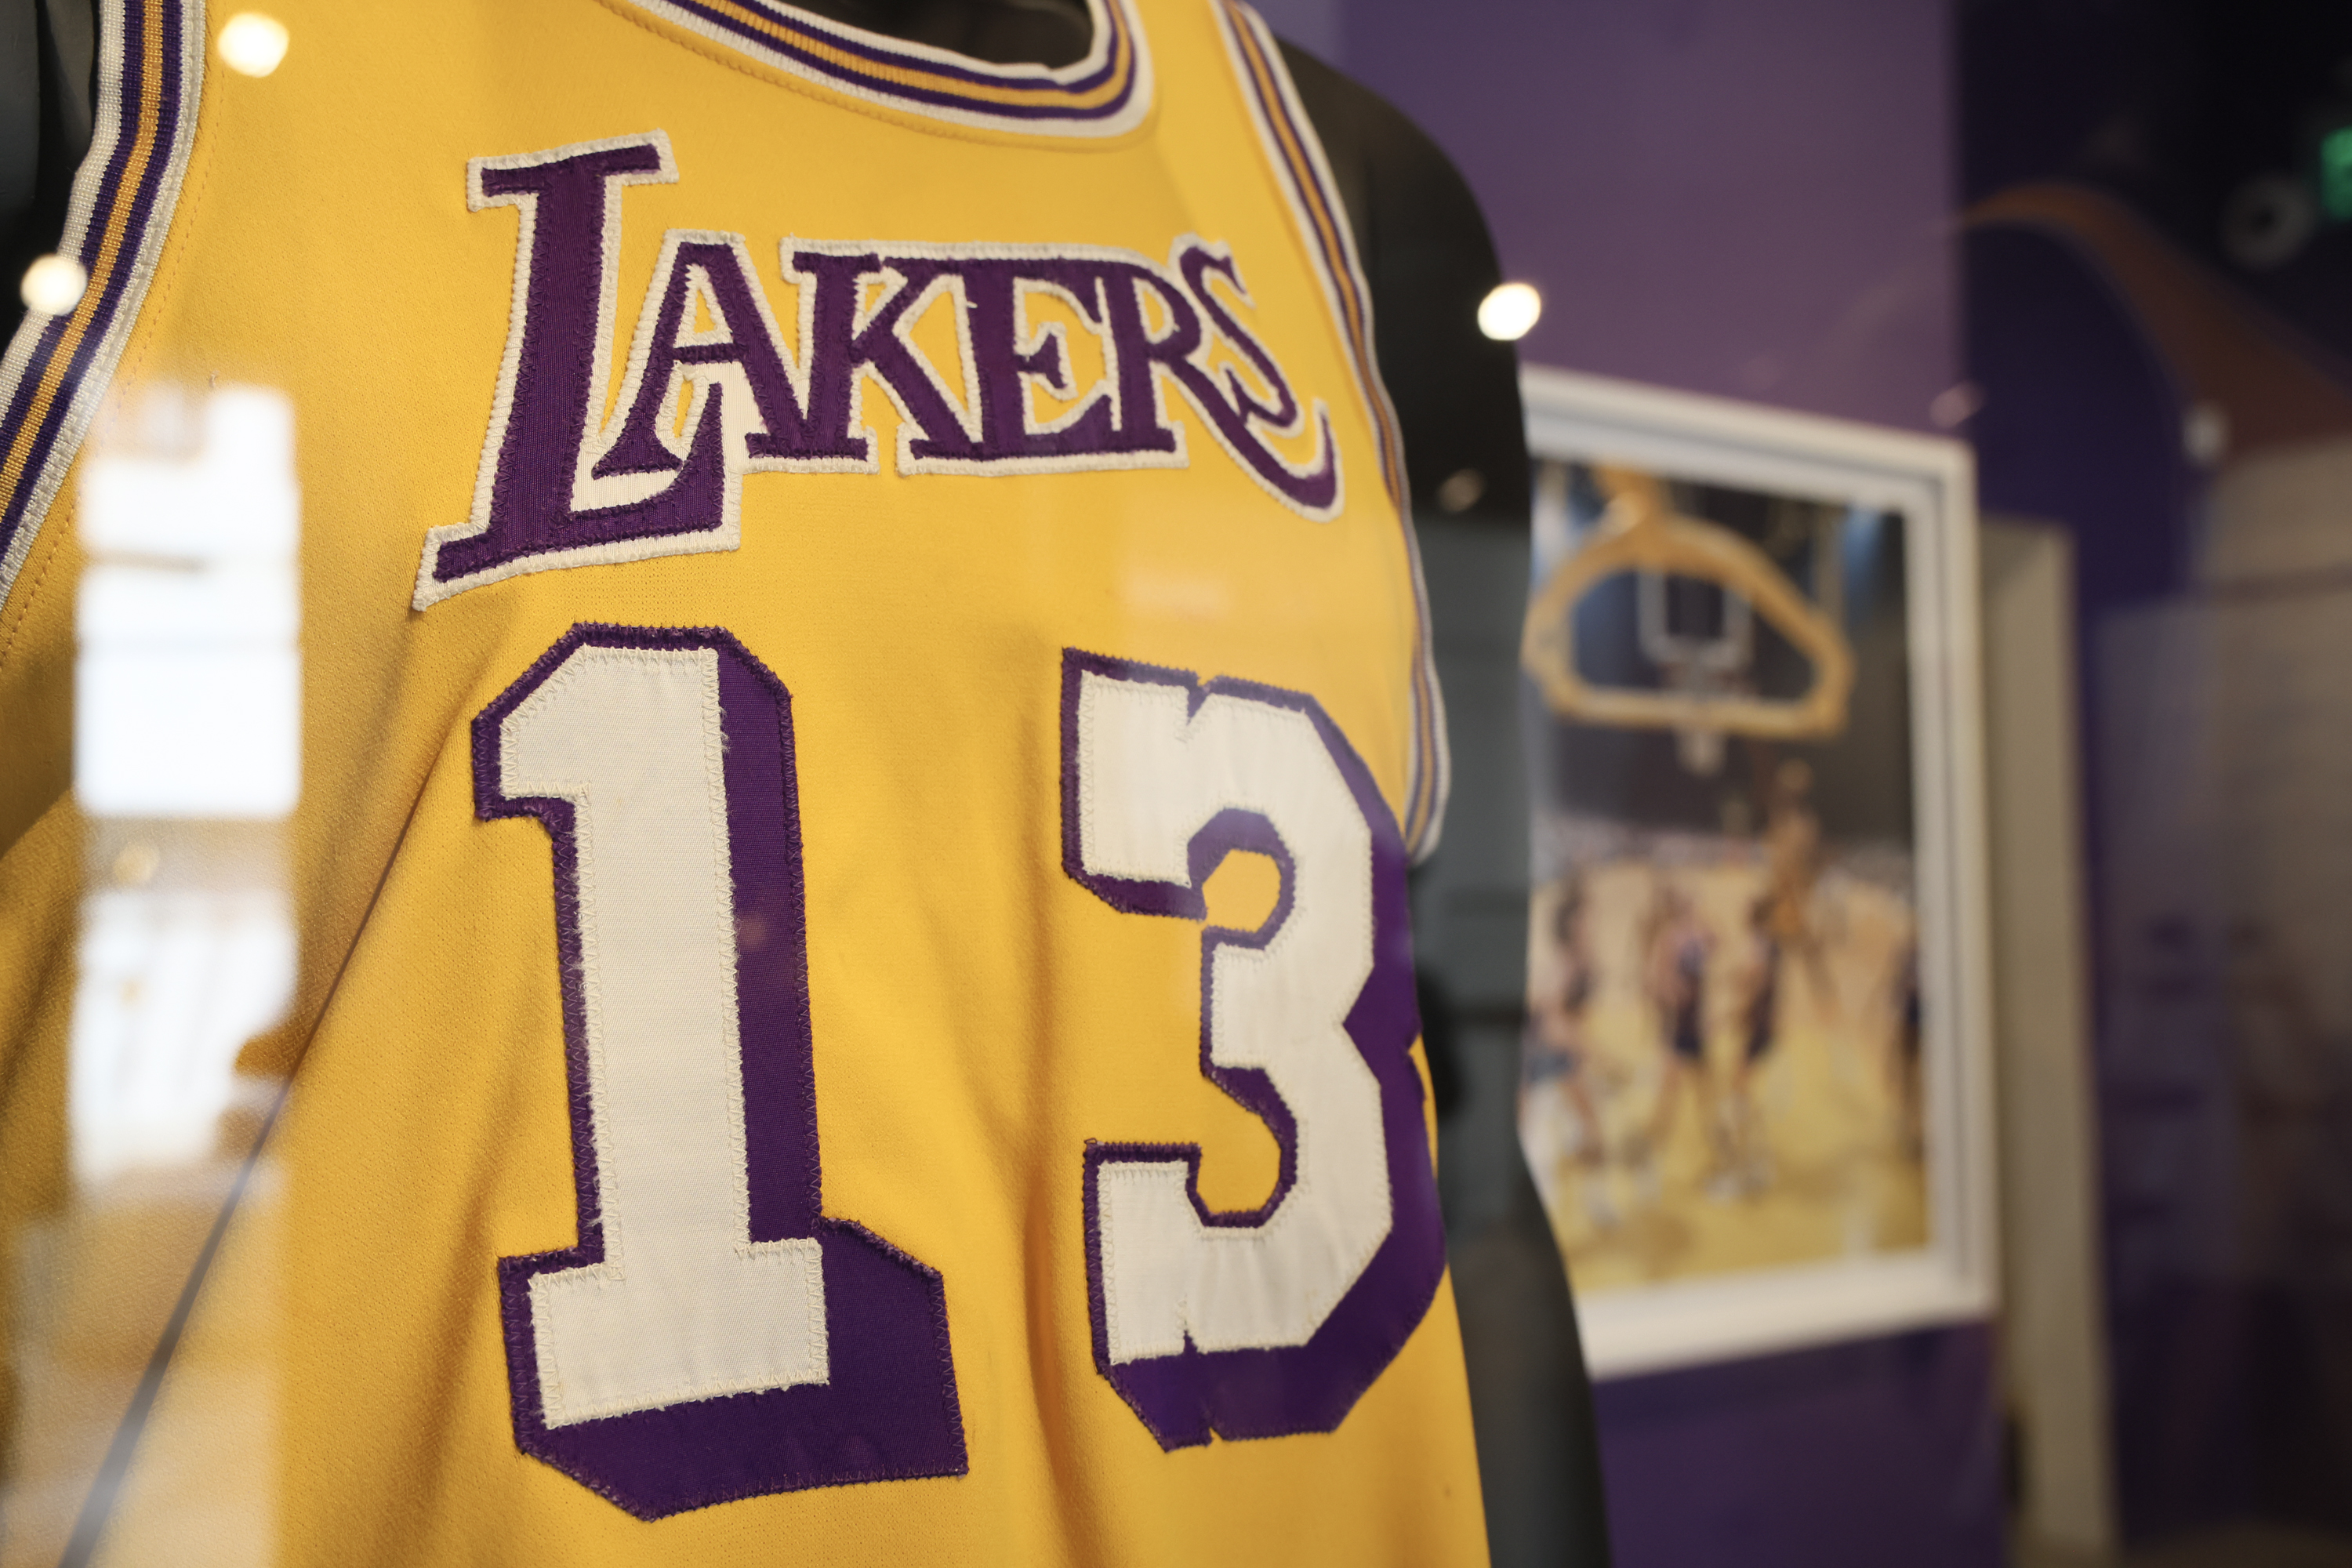 1972 Wilt Chamberlain jersey expected to sell for more than $4M at